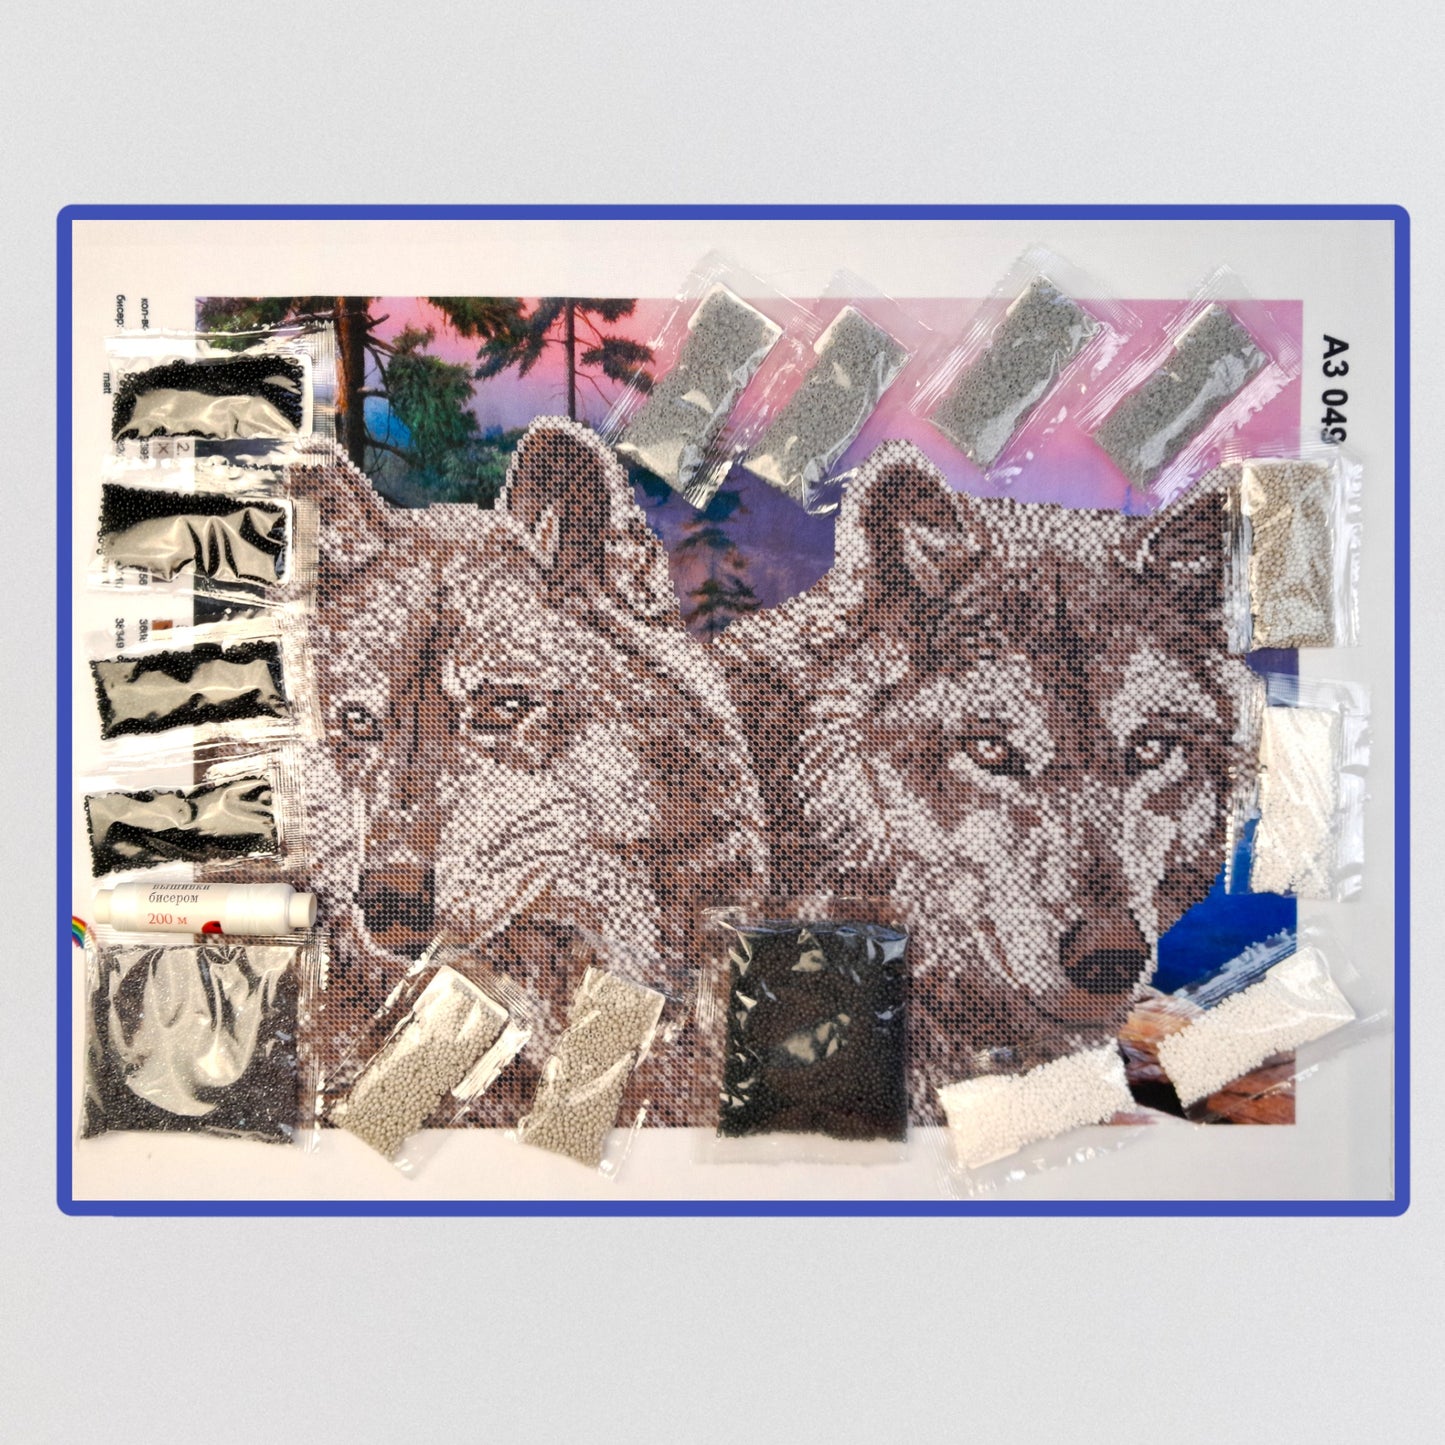 DIY Bead embroidery kit "Wolves". Size: 15.7-11.8" (40-30cm) - VadymShop